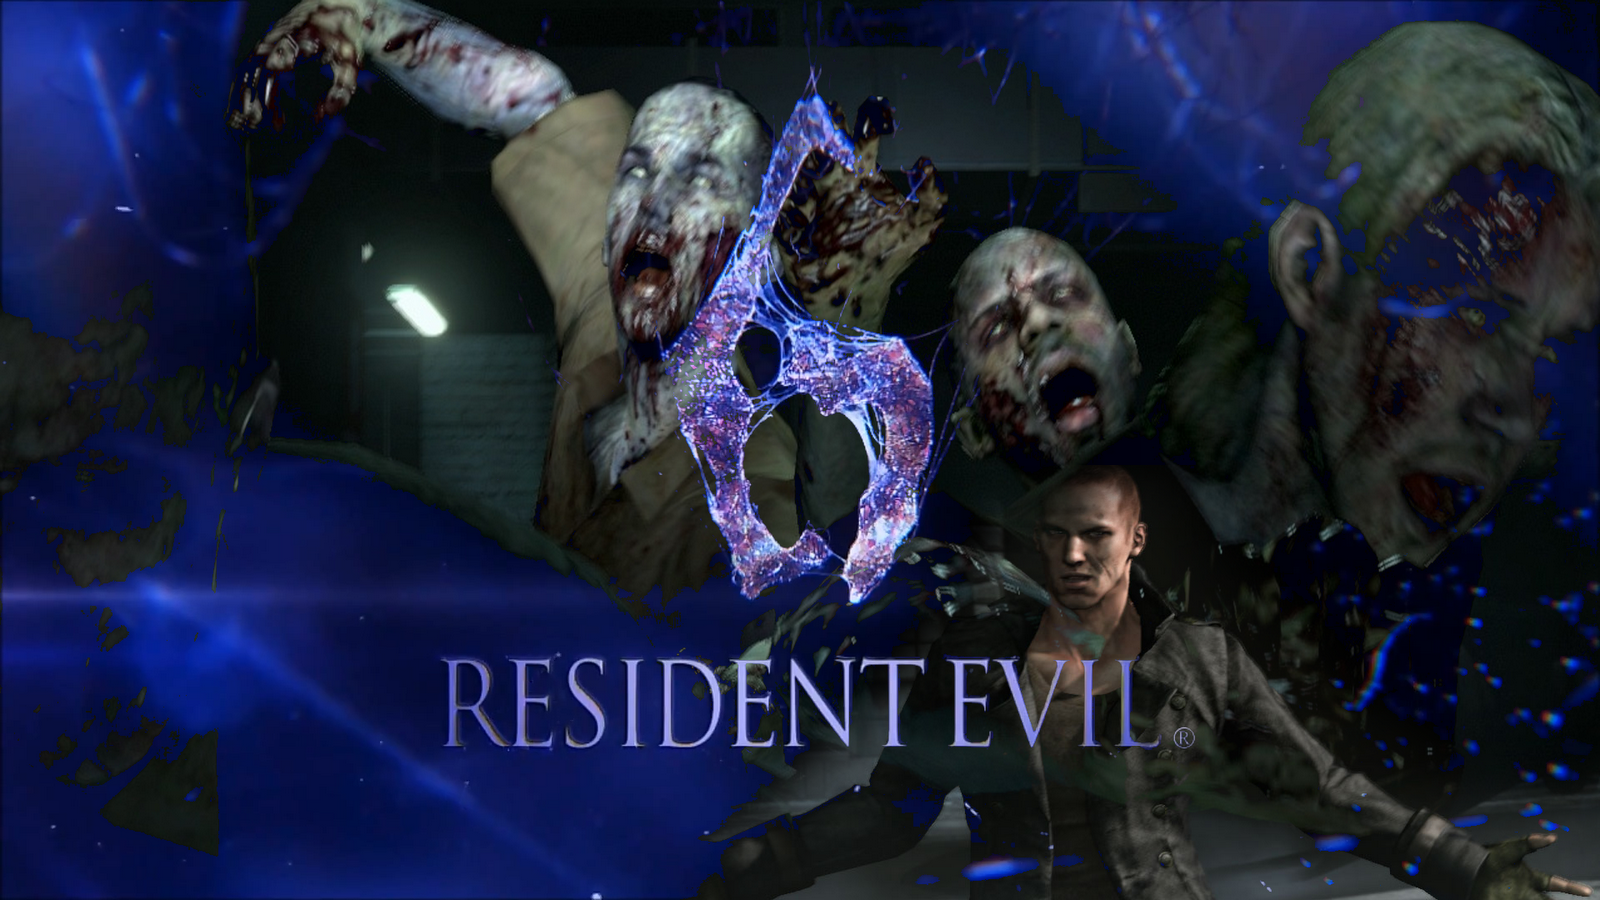 Article Games HD Wallpaper With The Title Resident Evil